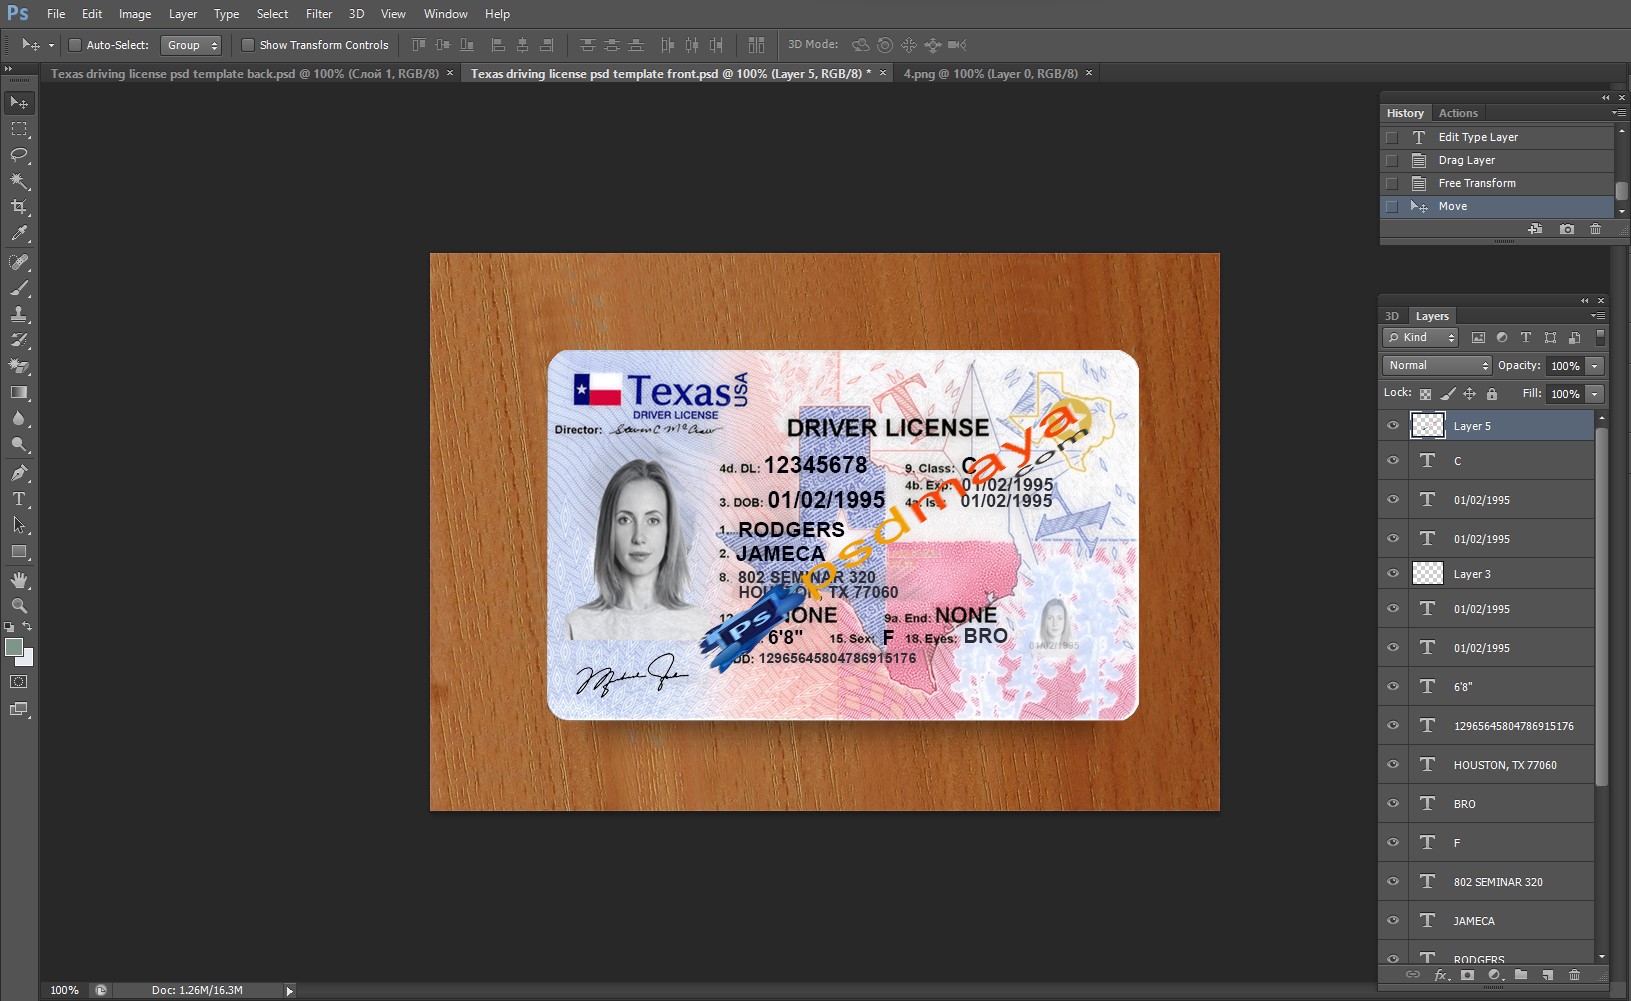 Texas driving license psd template